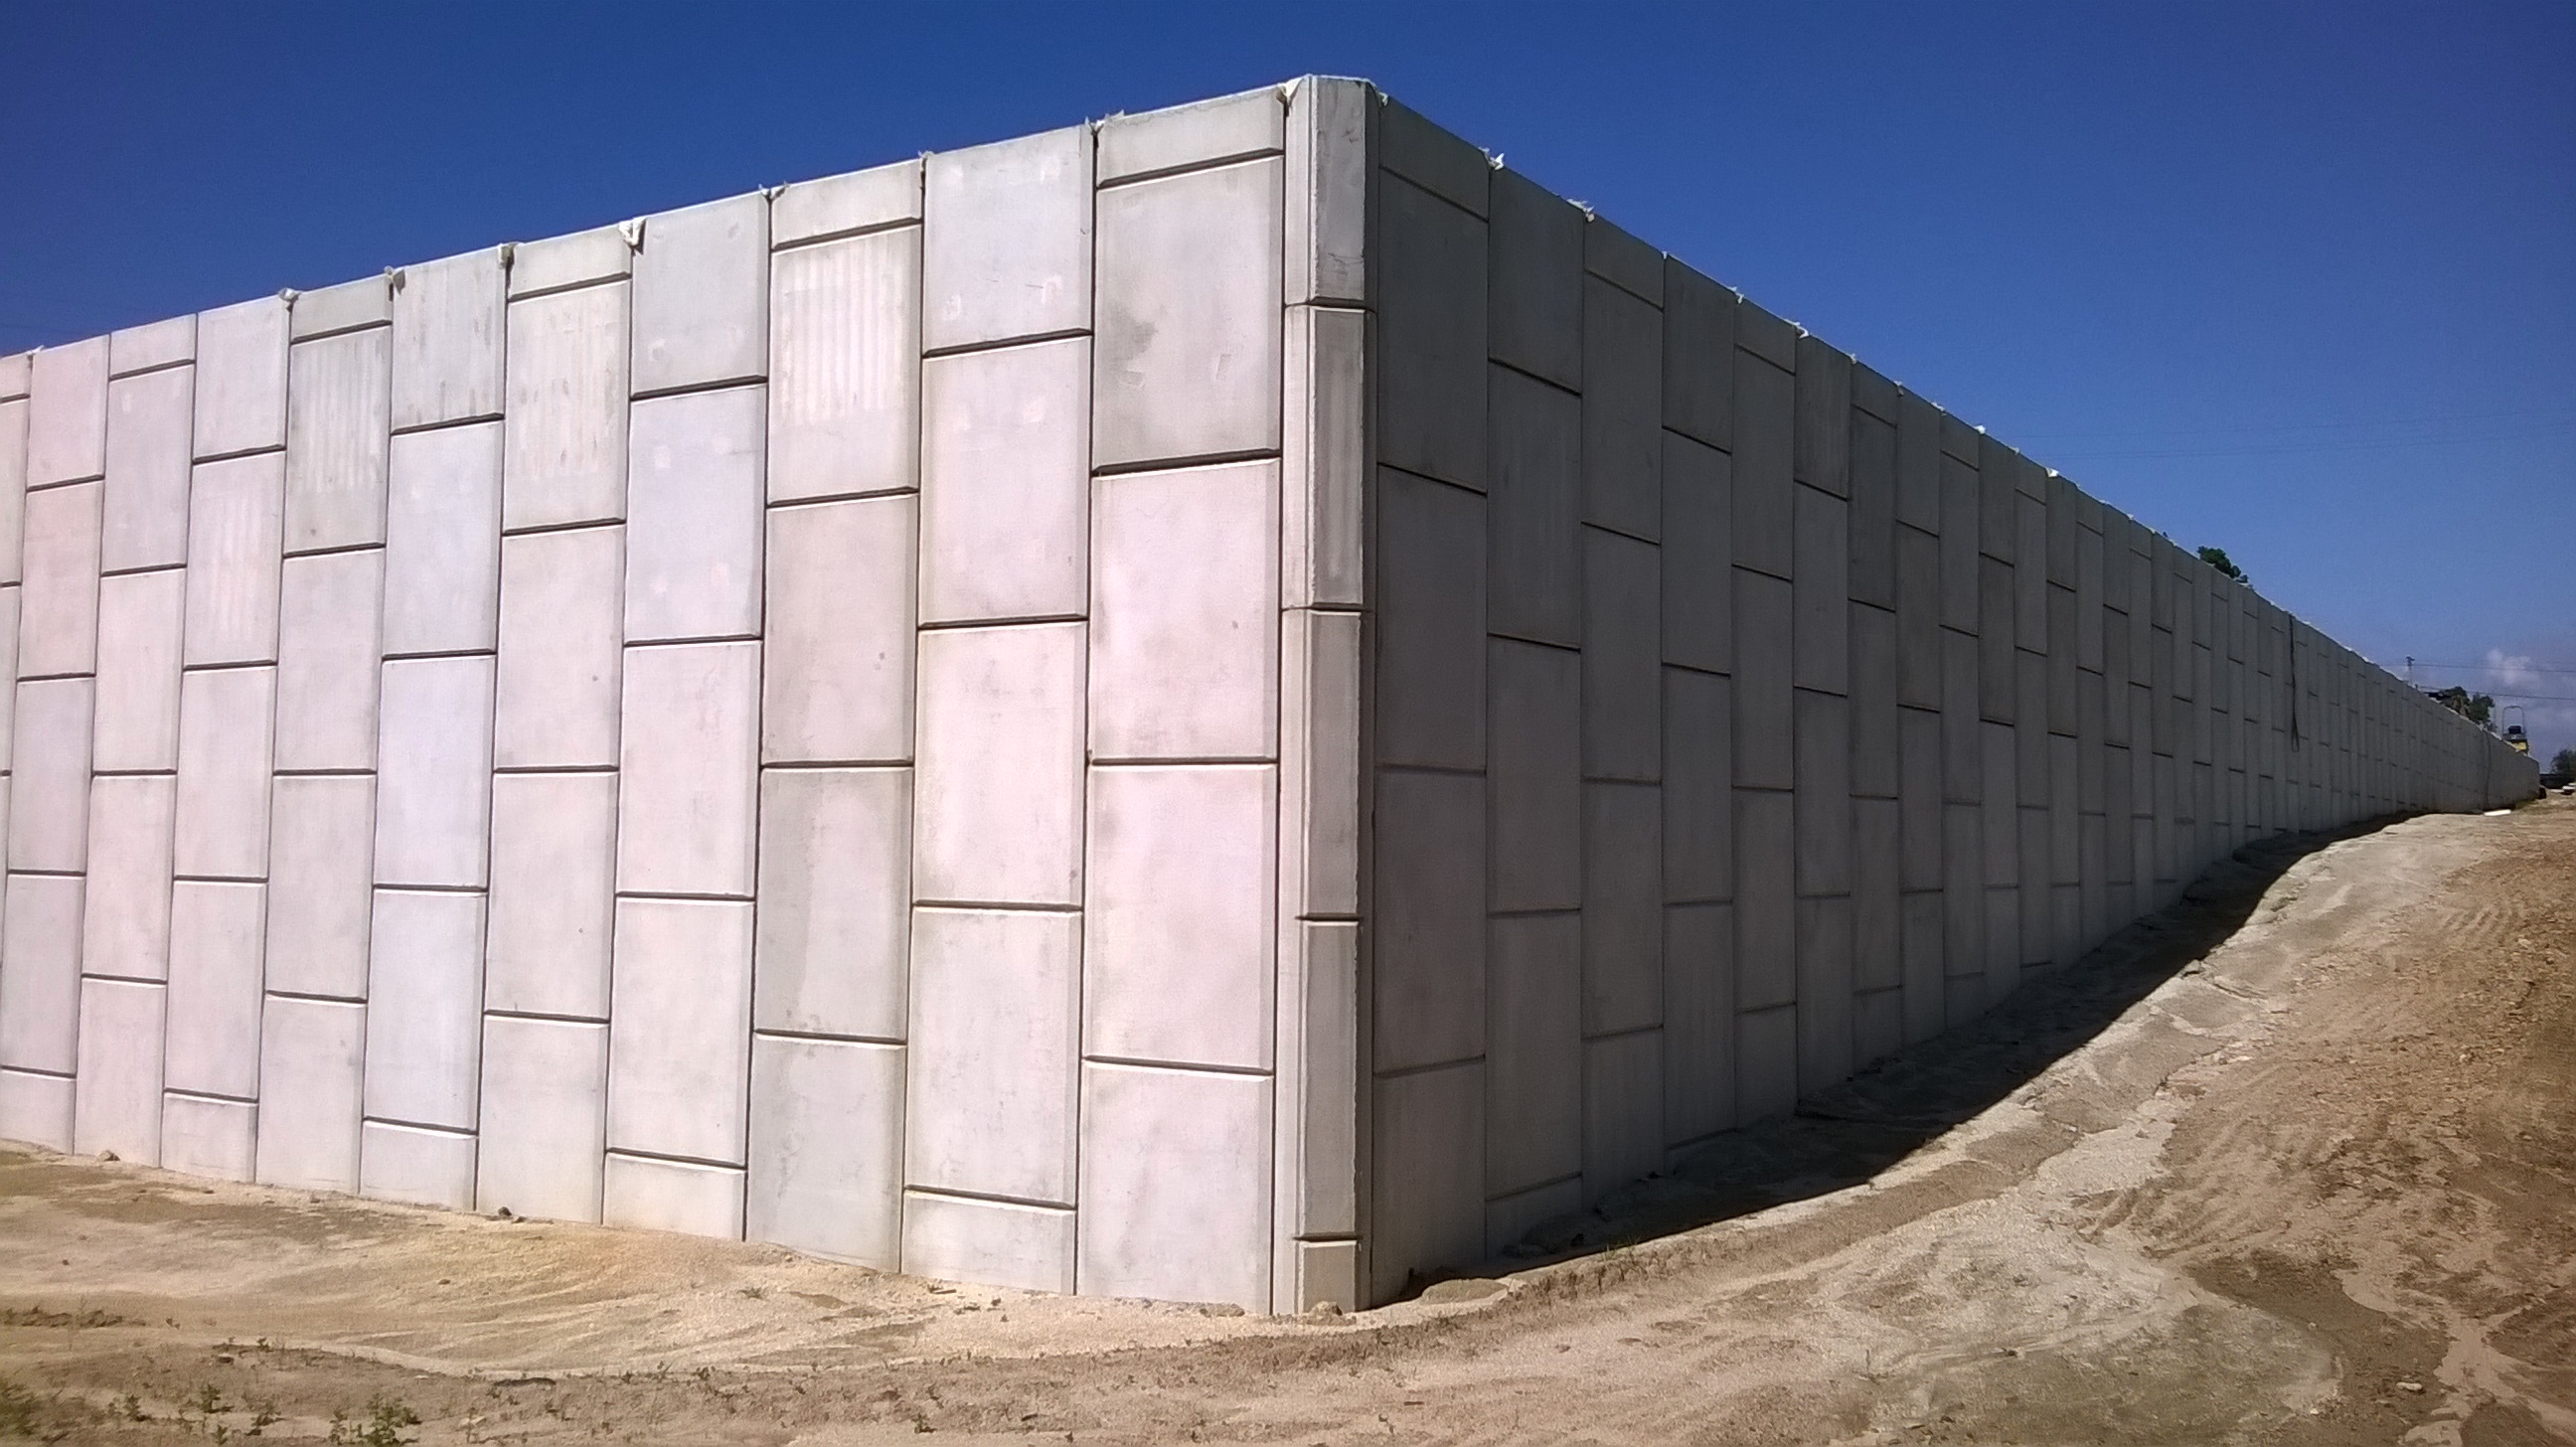 “SMART WALL” REINFORCED EARTH RETAINING WALLS FOR DUARTESFER, LDA. IN BARCELOS – PORTUGAL